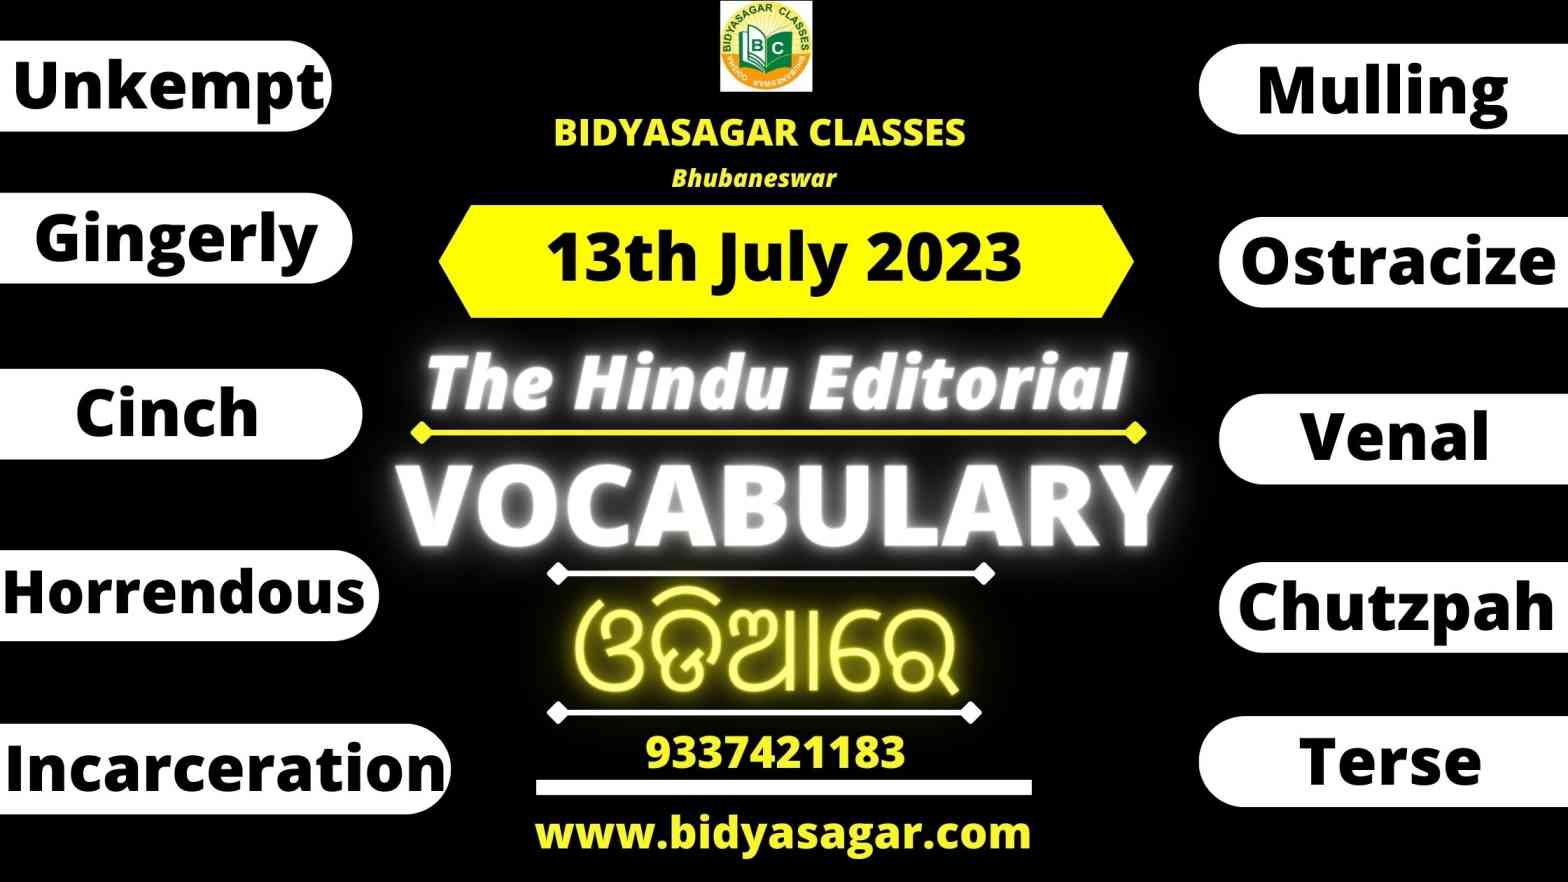 The Hindu Editorial Vocabulary of 13th July 2023